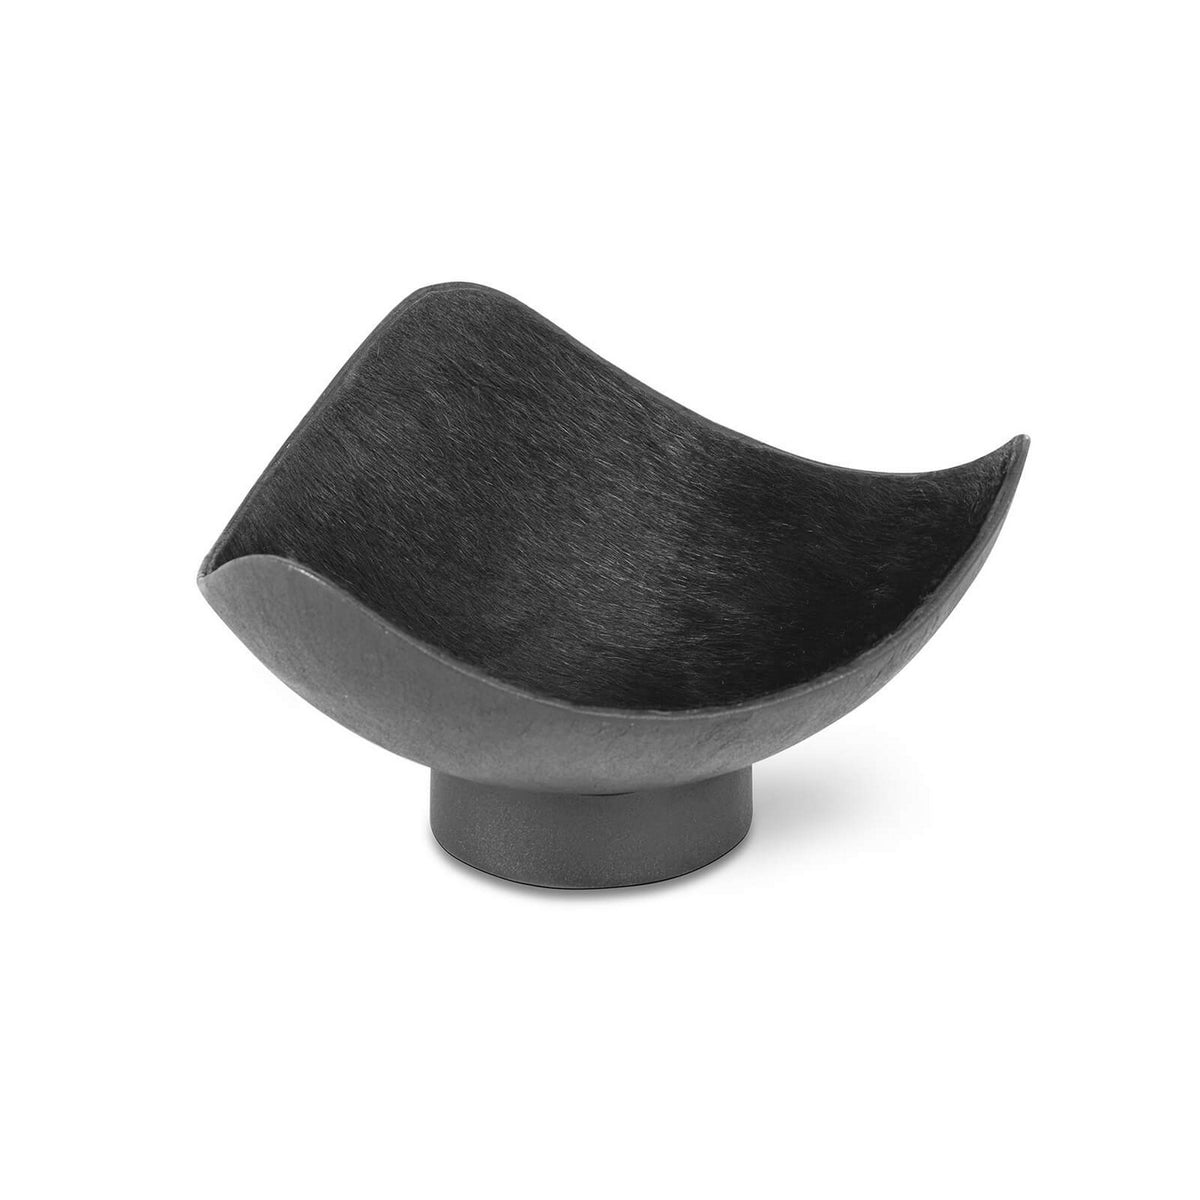 Regina Andrew Bowl from the Bentley collection in Black finish